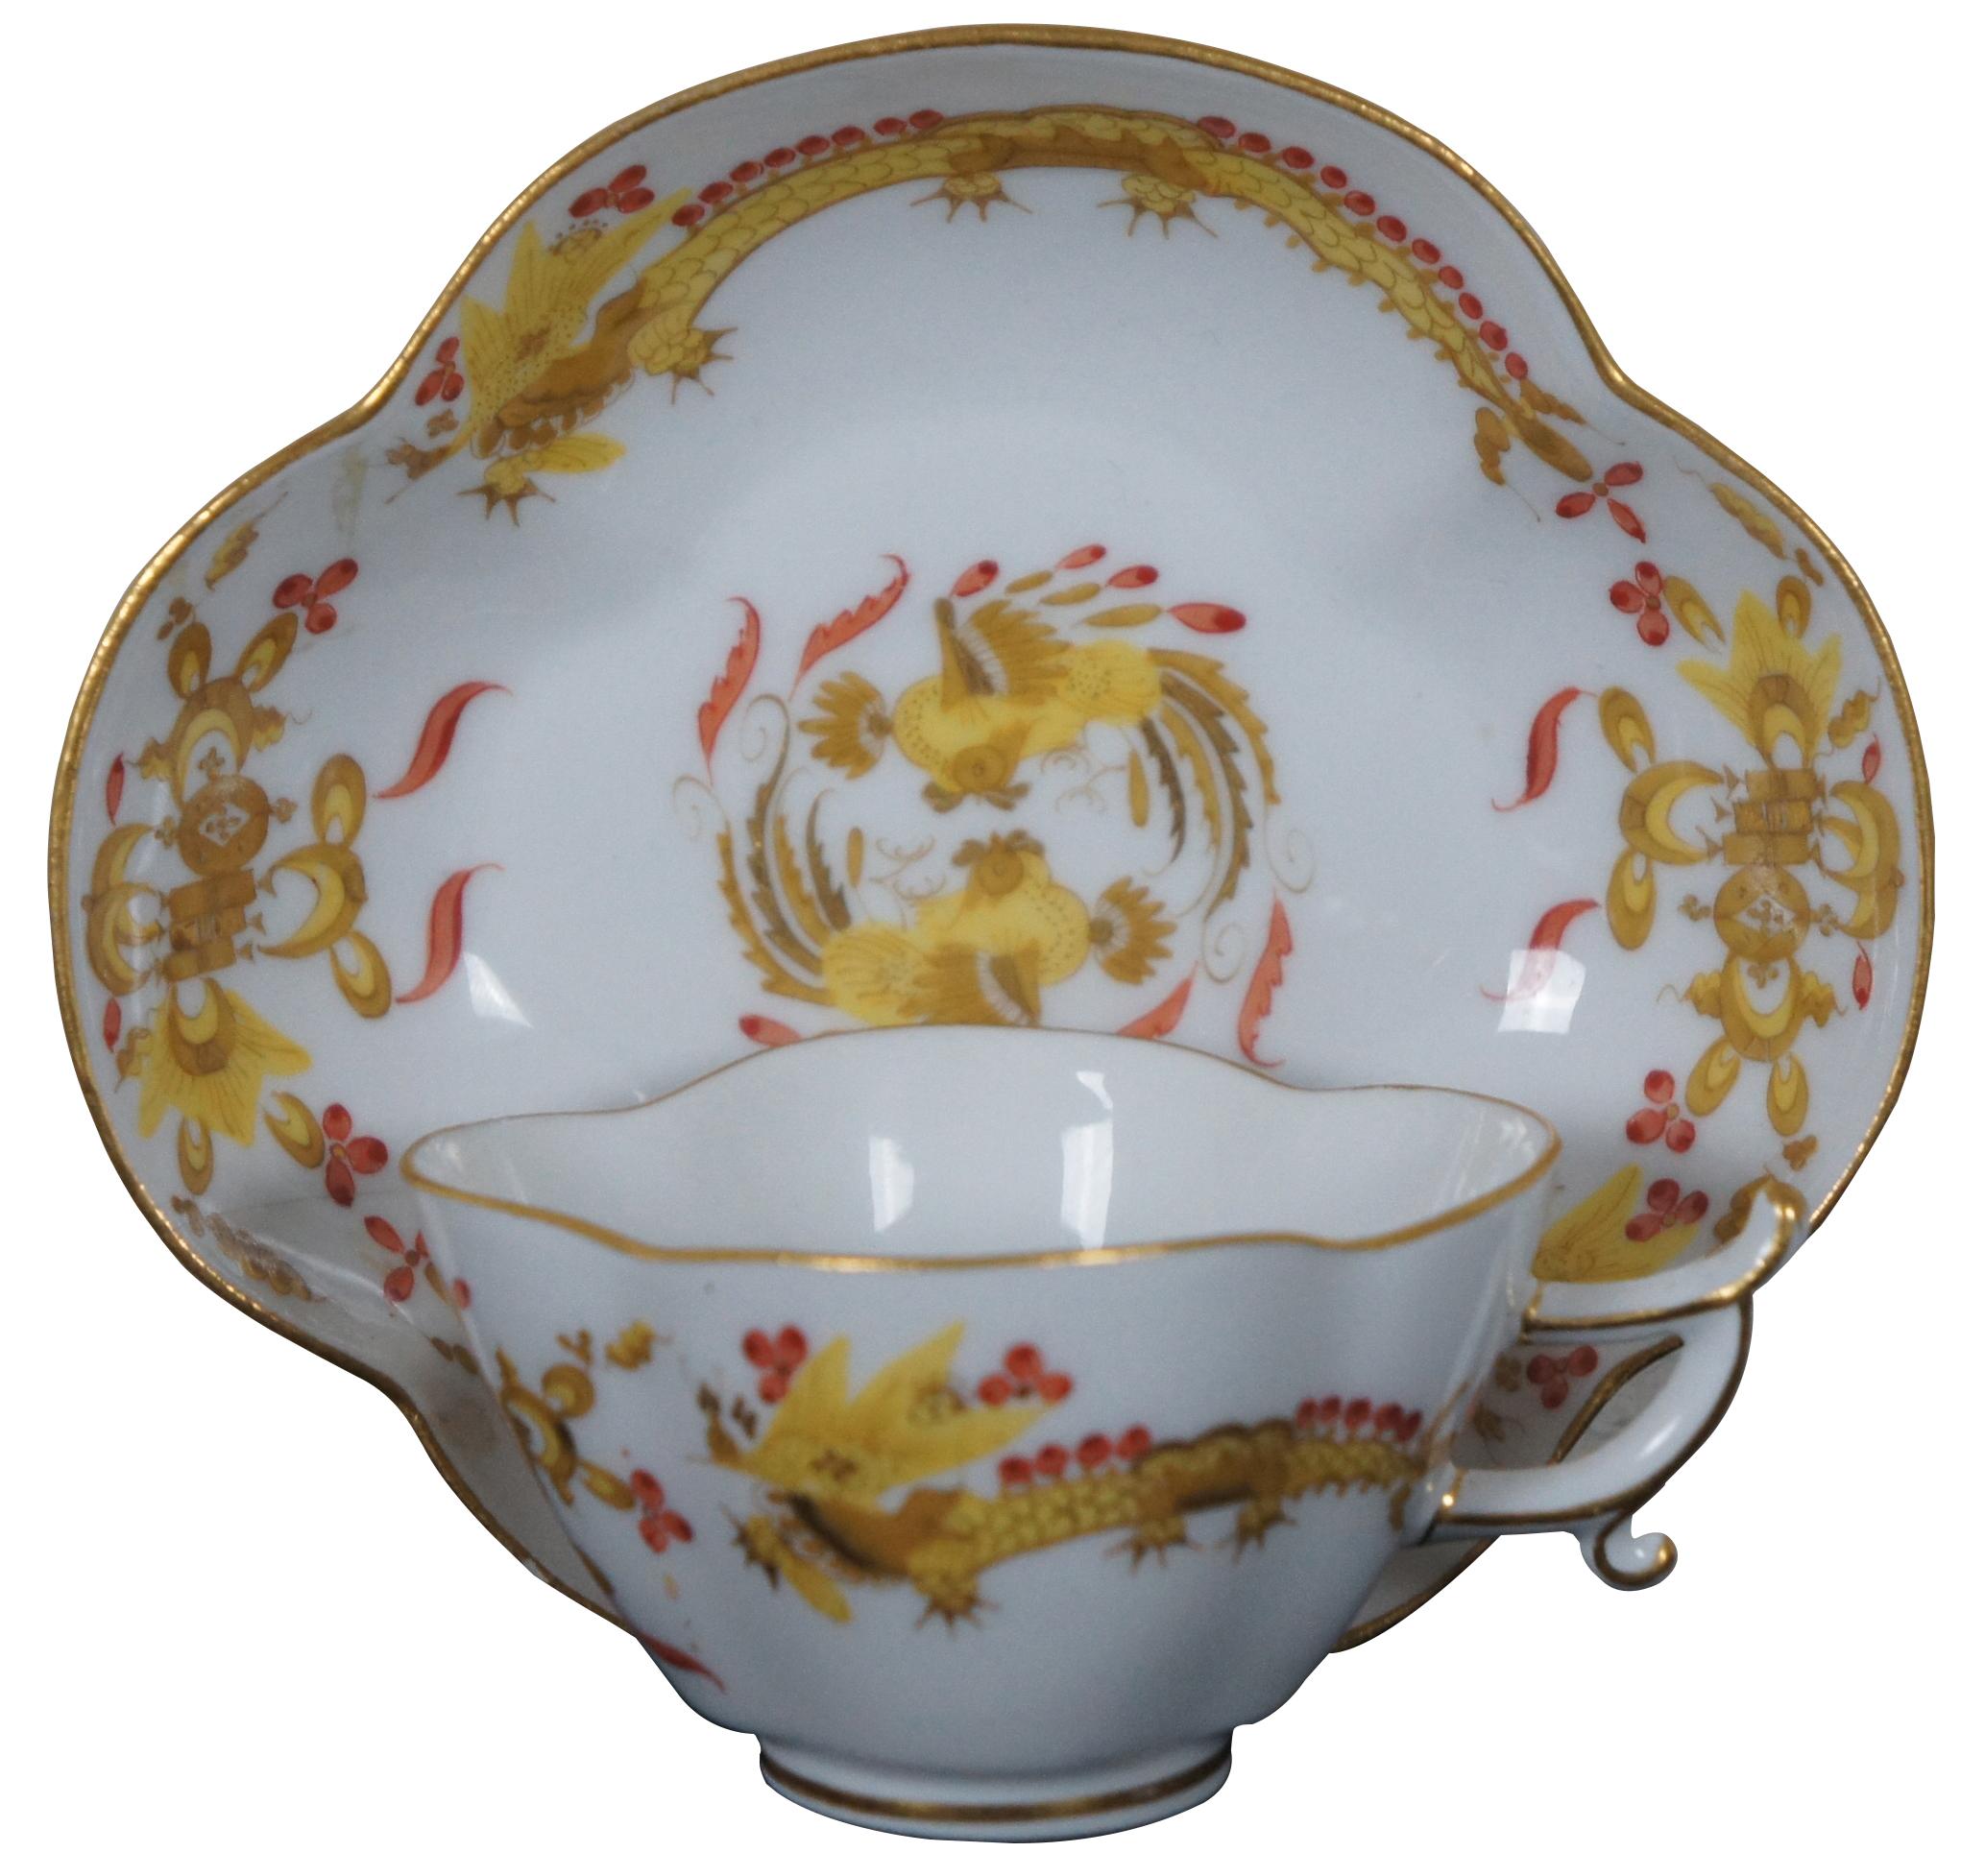 Antique Meissen scalloped porcelain demitasse cup and saucer, numbered B117 with gold and red dot Chinese Court dragons.

Measures: Saucer - 4.75” x 4.5” x 1.125” / Teacup - 3.5” x 2.625” x 1.75” (Width x Depth x Height) 5